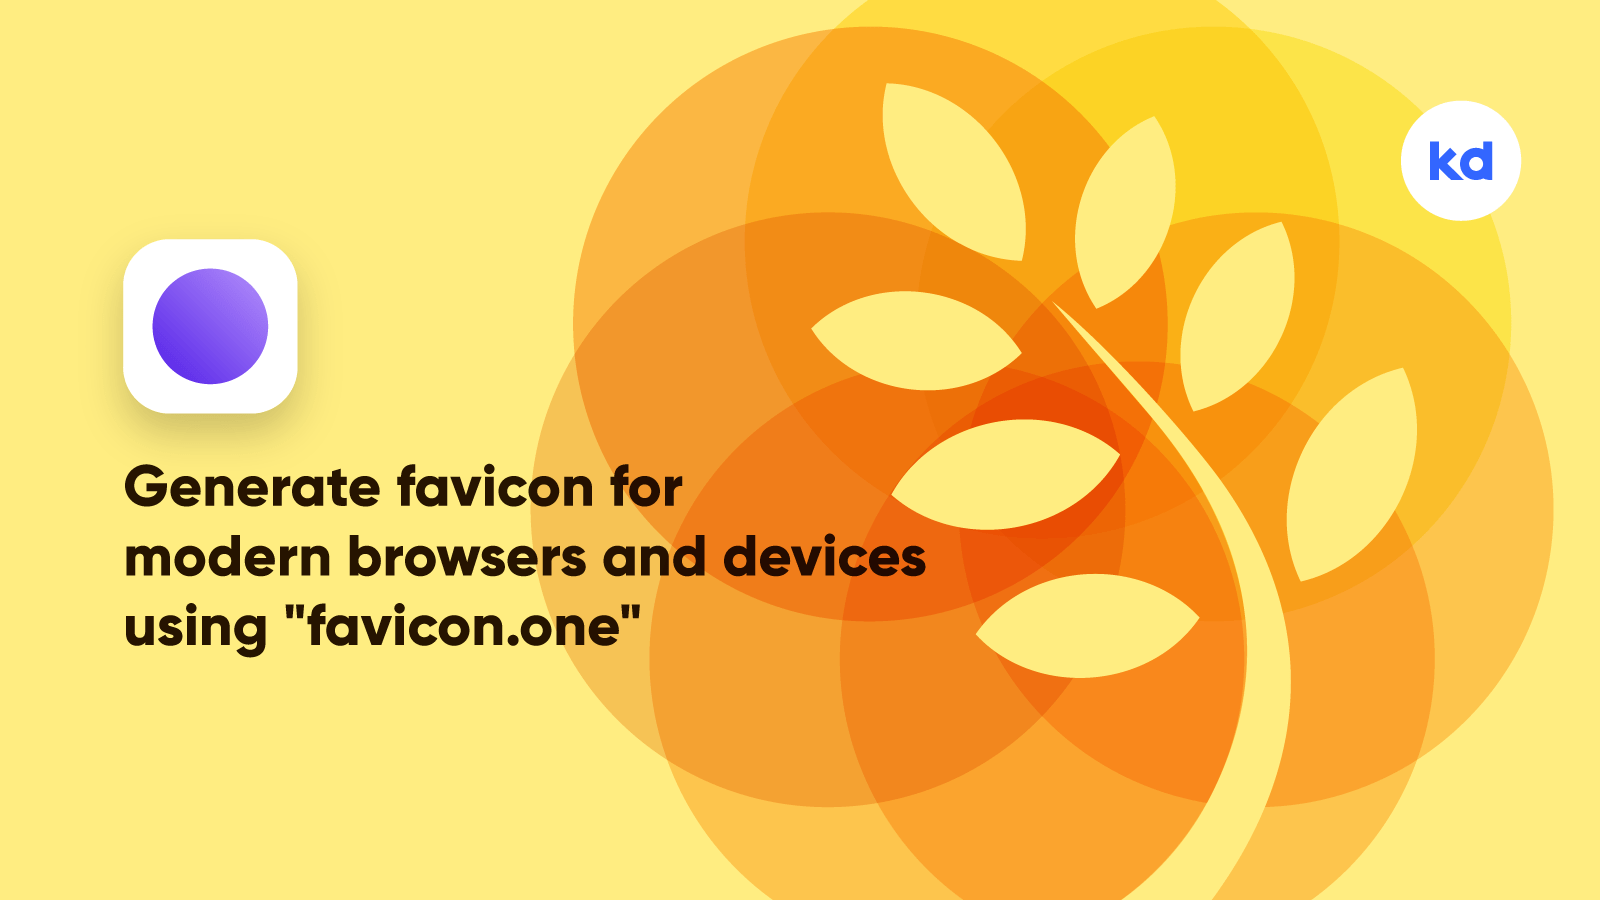 Generate favicon for modern browsers and devices using &#8220;favicon.one&#8221;